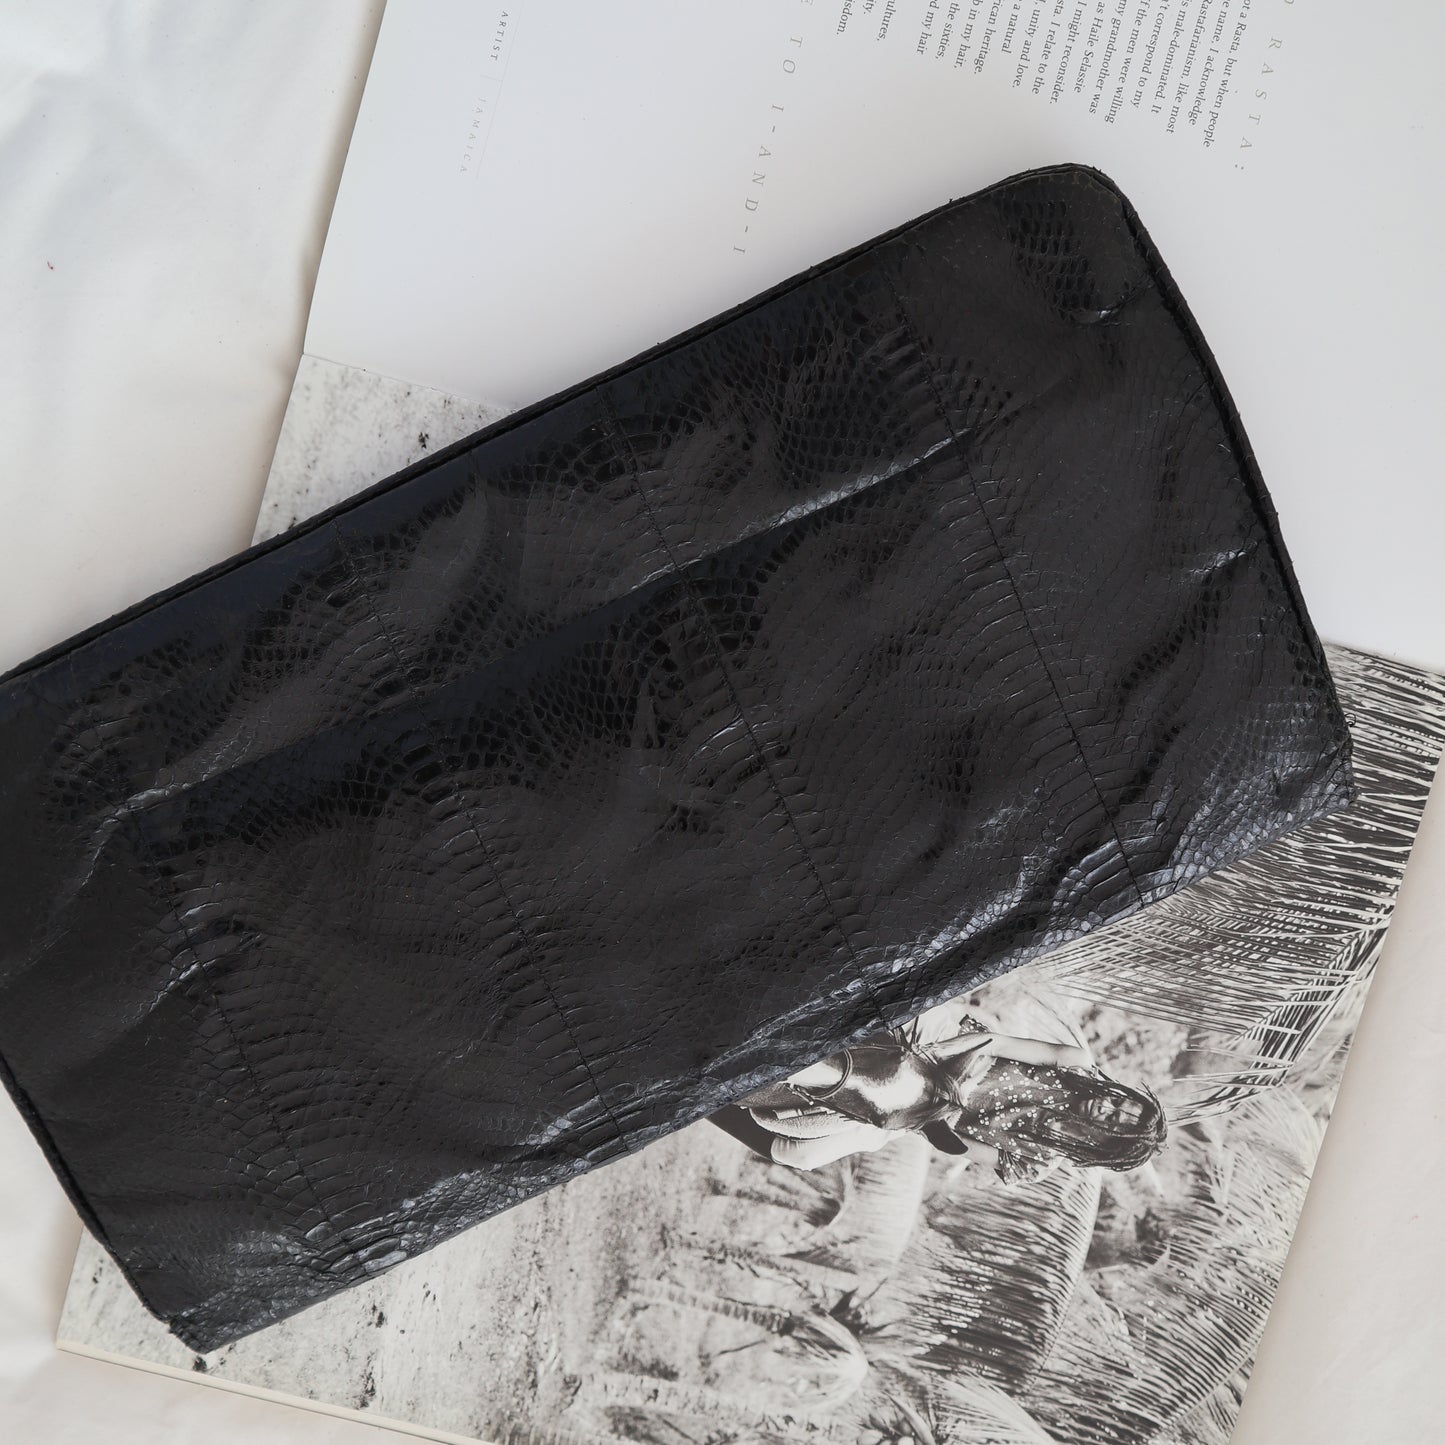 New Accessories: Genuine leather Serpantine Clutch - Thrift Happens 2